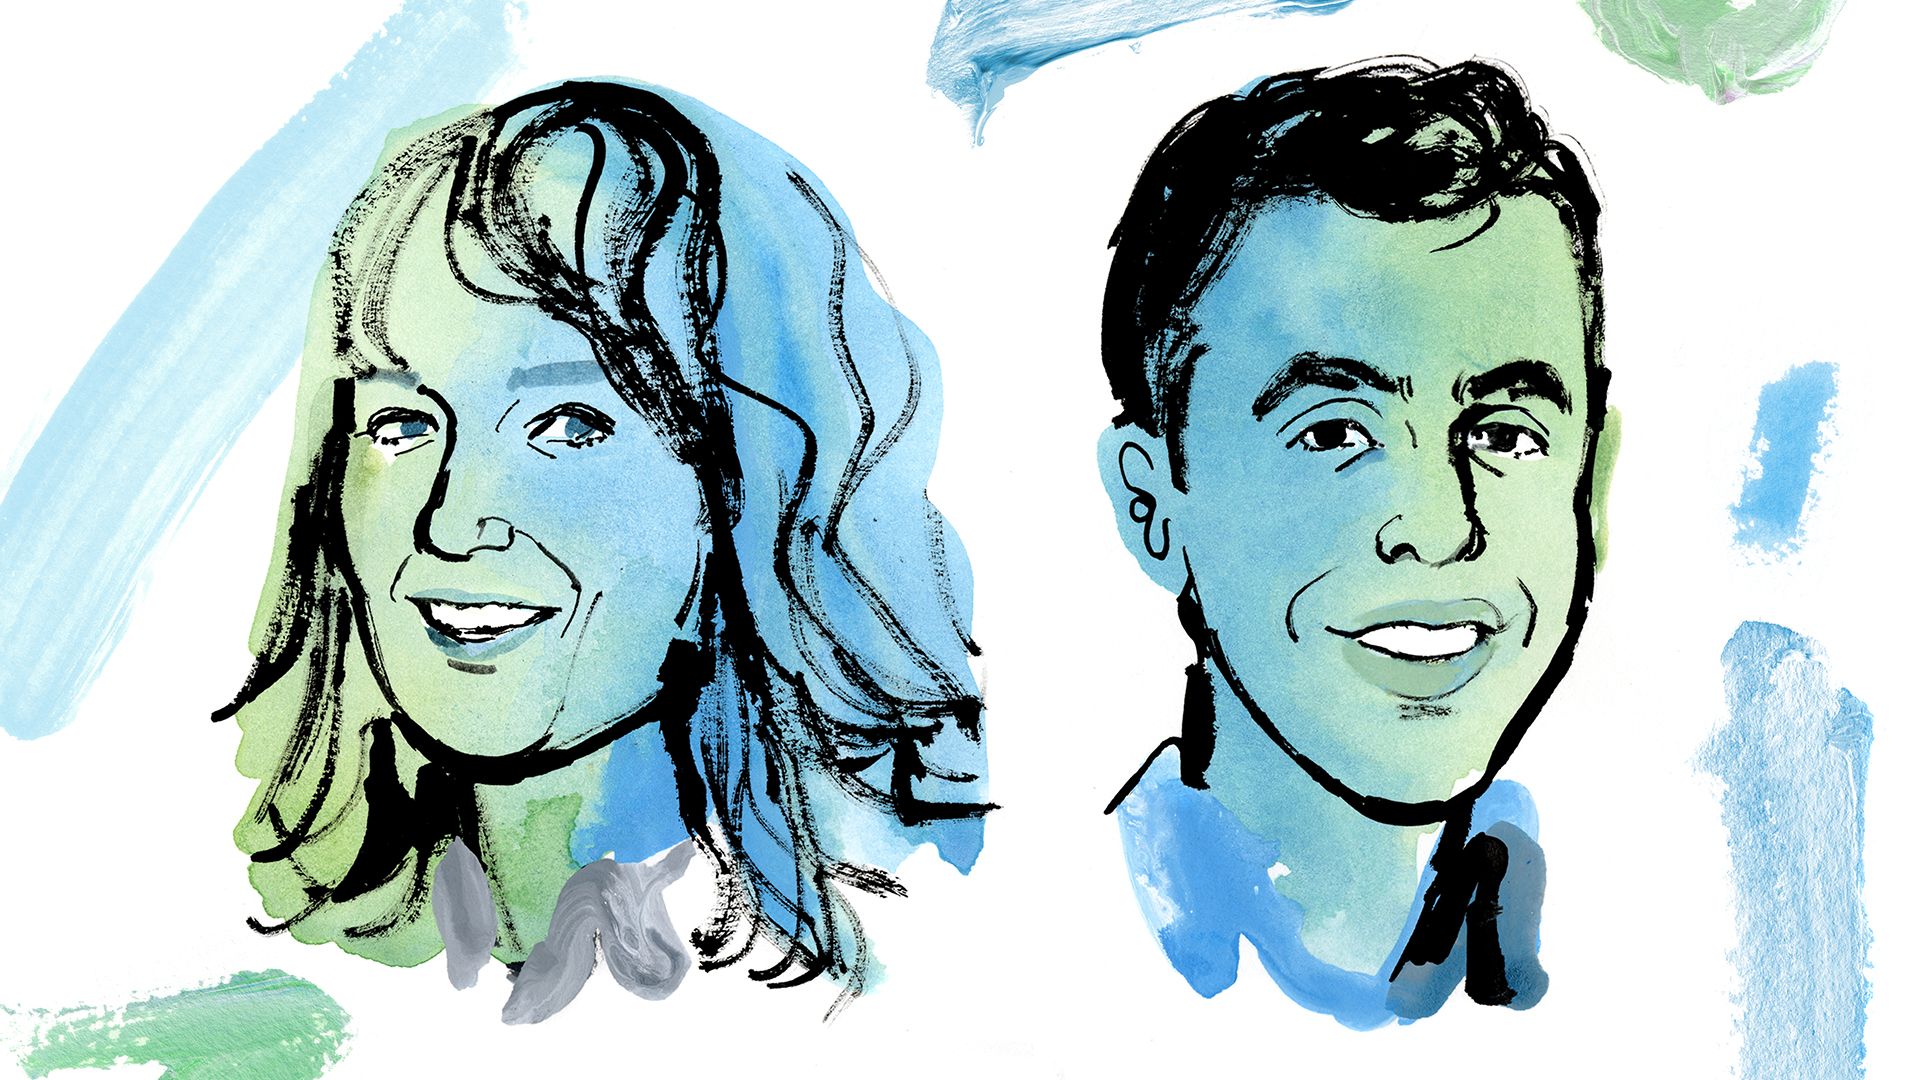 Illustrated portraits of Paul Christiano and Beth Barnes